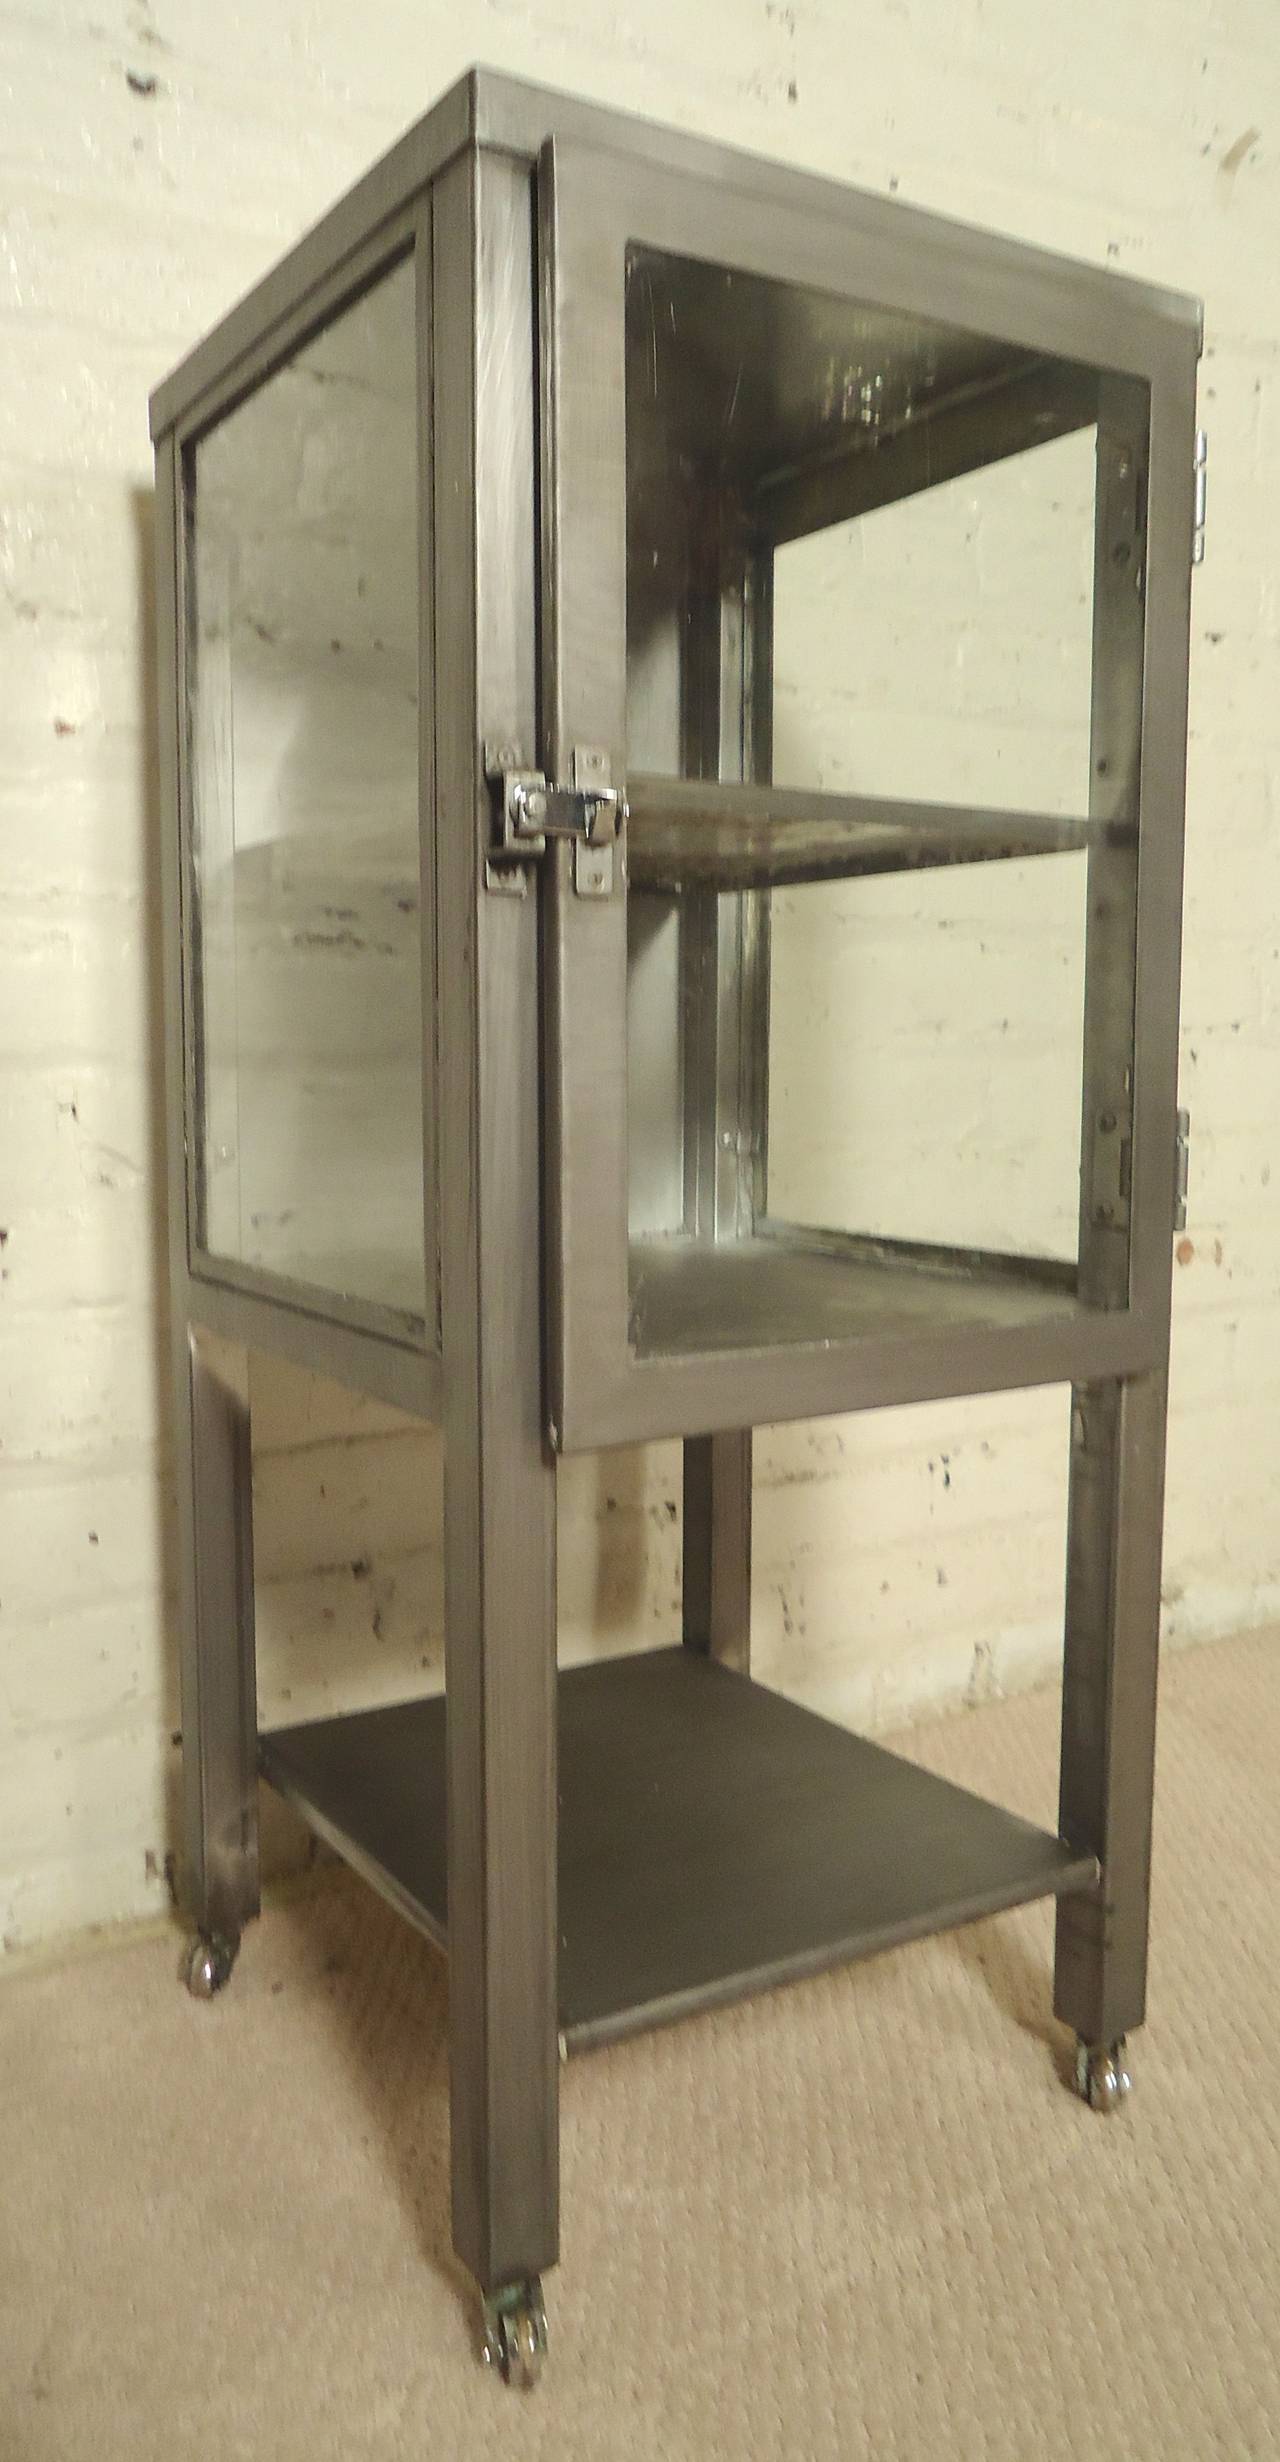 Very unusual side cabinet with glass sides. Refinished in a bare metal style finish and set on casters. Removable metal shelf and bottom shelf. Great as a modern nightstand or bathroom cabinet

(Please confirm item location - NY or NJ - with